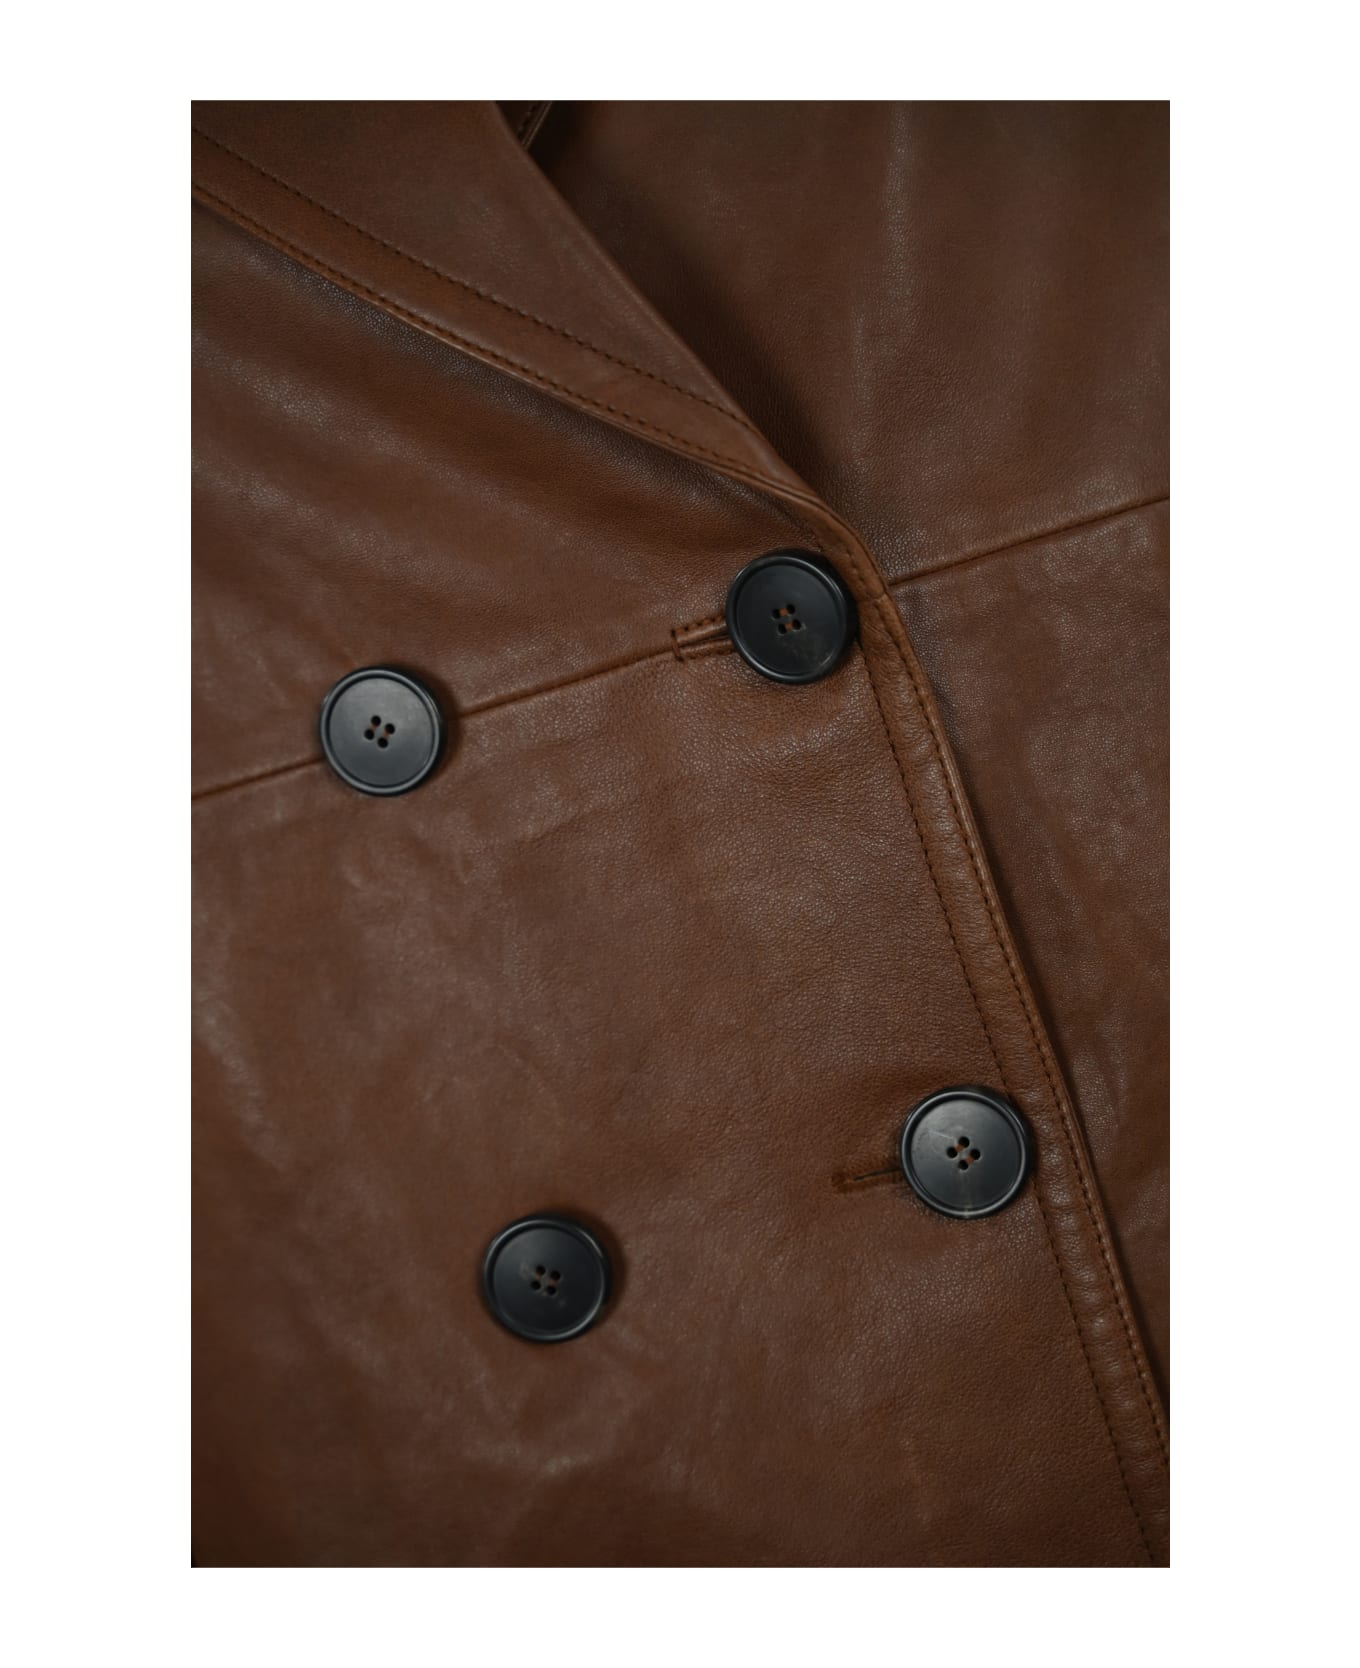 Weekend Max Mara Double-breasted Leather Peacoat - Cuoio